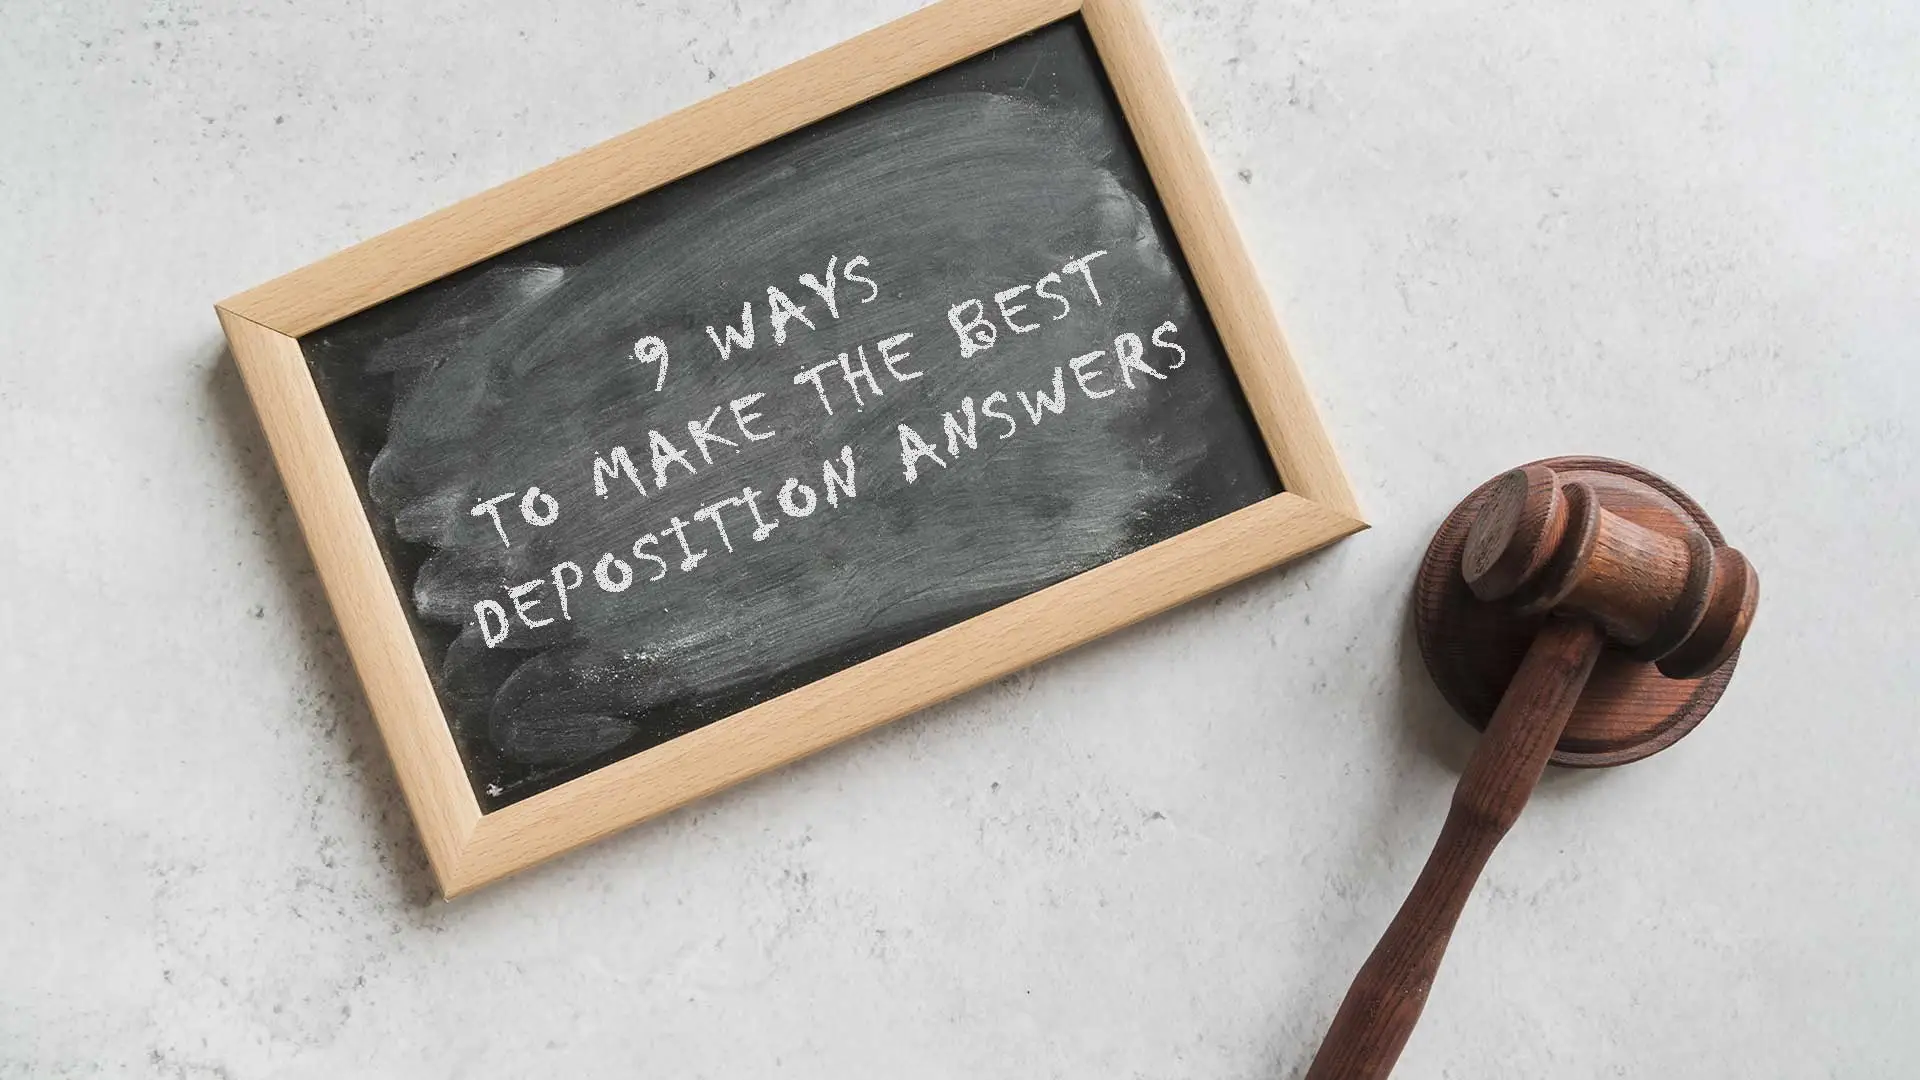 best deposition answers